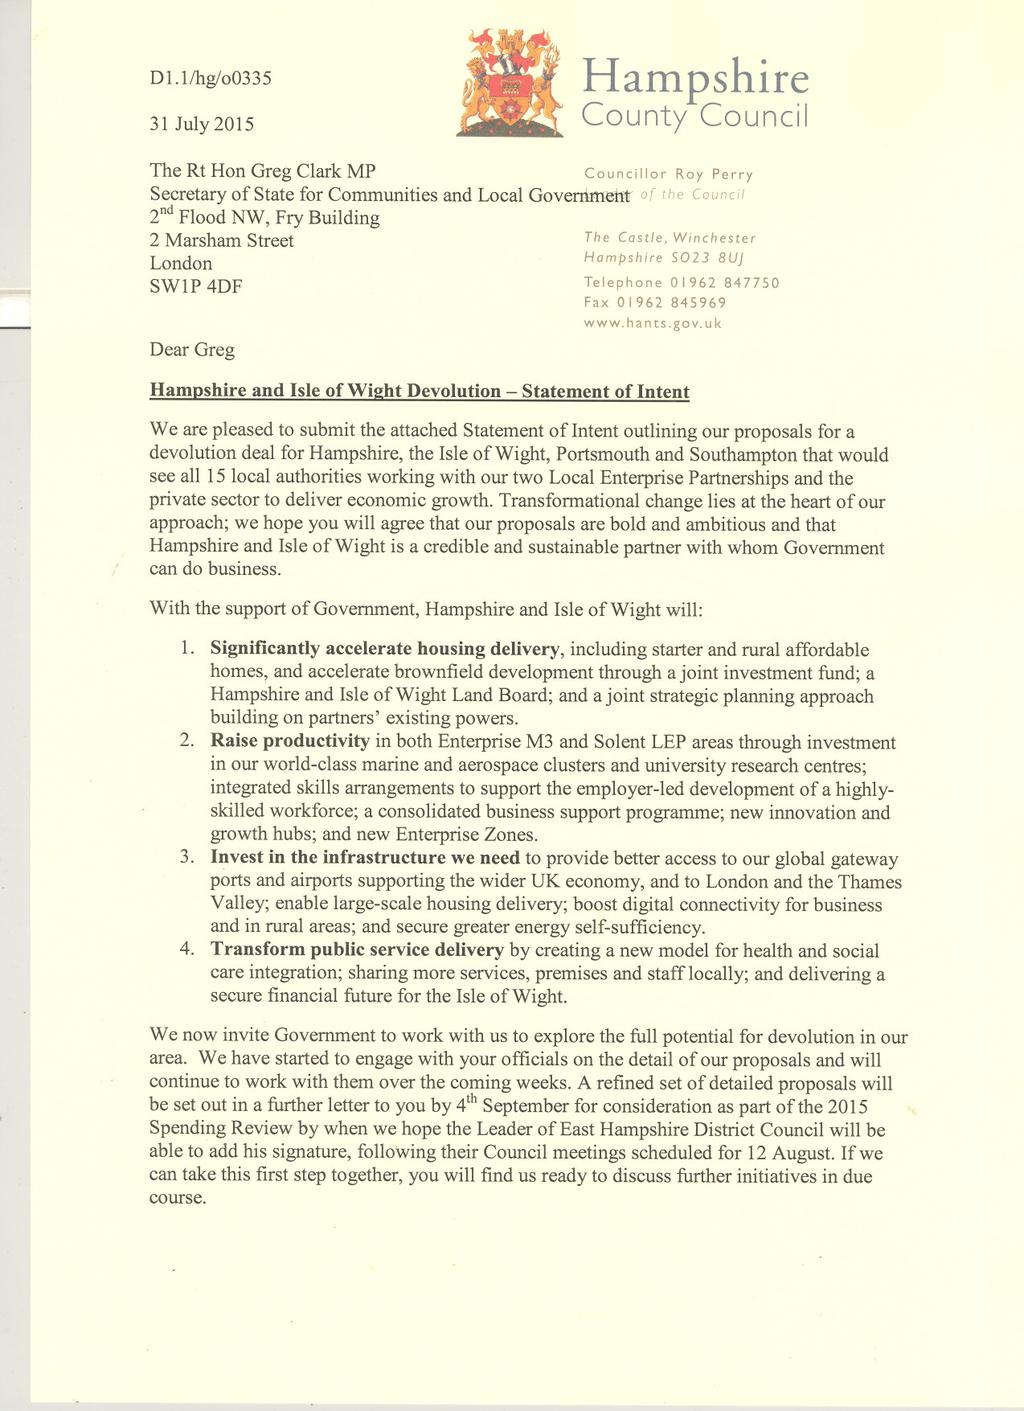 D 1.1/hg/o0335 31 July 2015 Hampshire County Council APPENDIX 1 The Rt Hon Greg Clark MP Councillor Roy Perry Secretary of State for Communities and Local Goverrlme11t of the Council 2nd Flood NW,